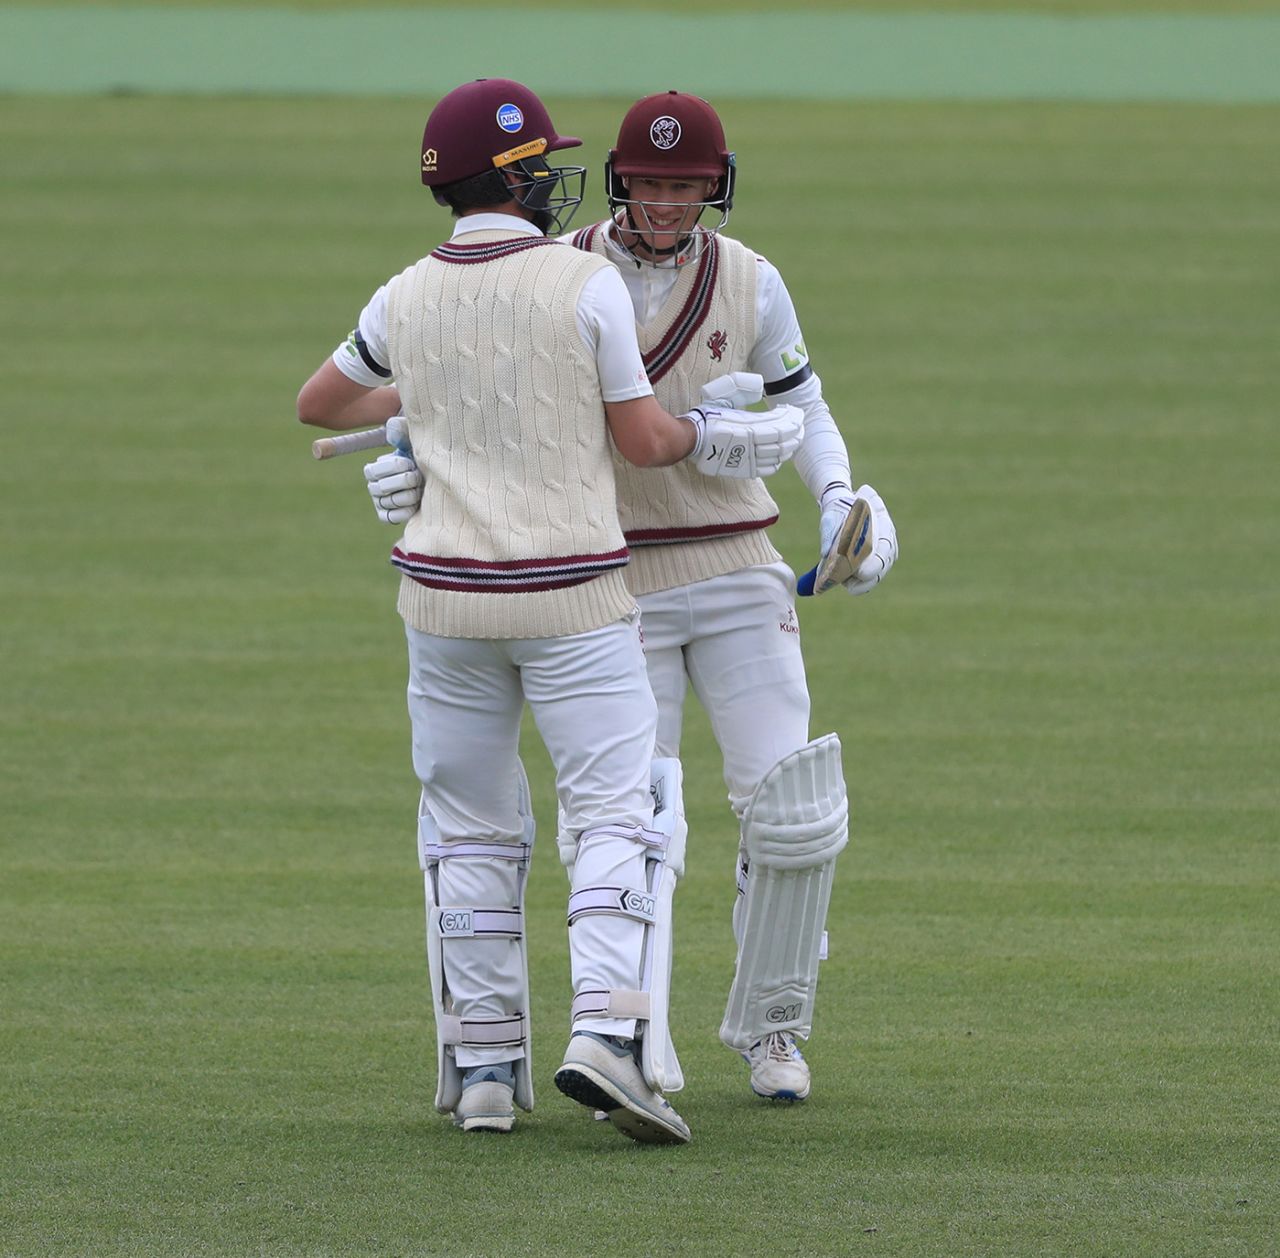 Lewis Gregory and George Bartlett saw Somerset home, Middlesex vs Somerset, County Championship, Lord's, April 11, 2021